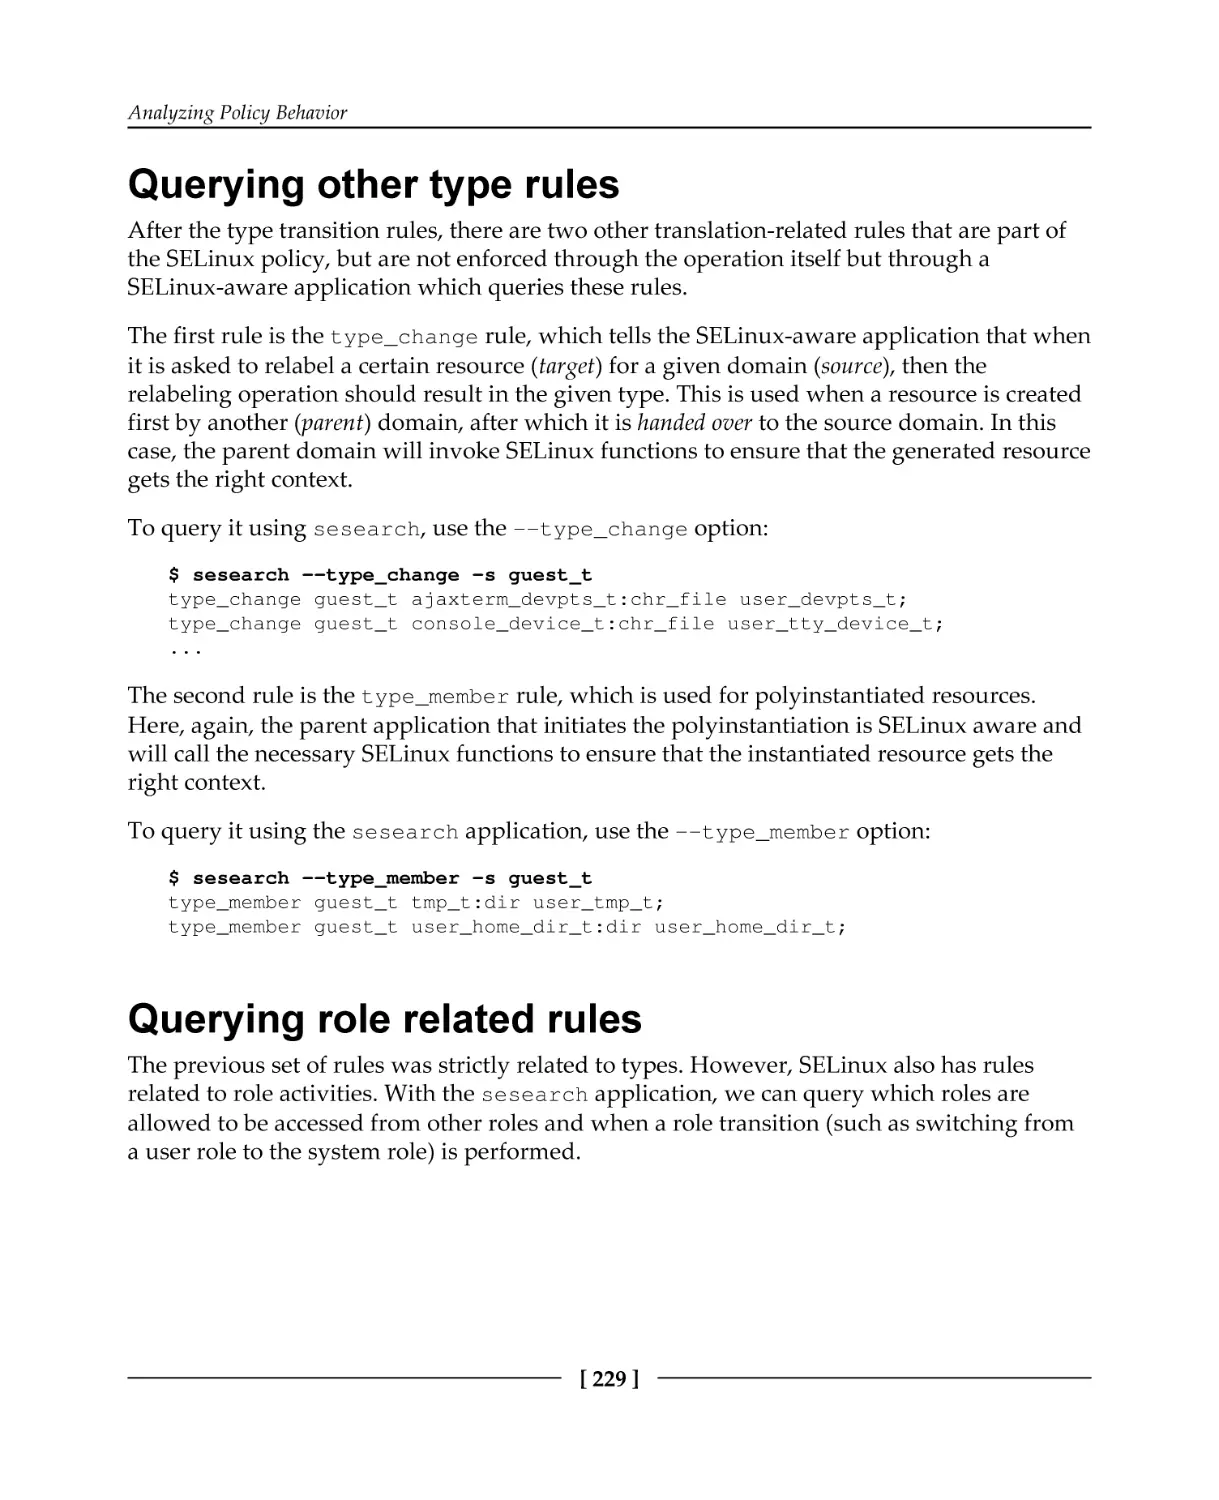 Querying other type rules
Querying role related rules